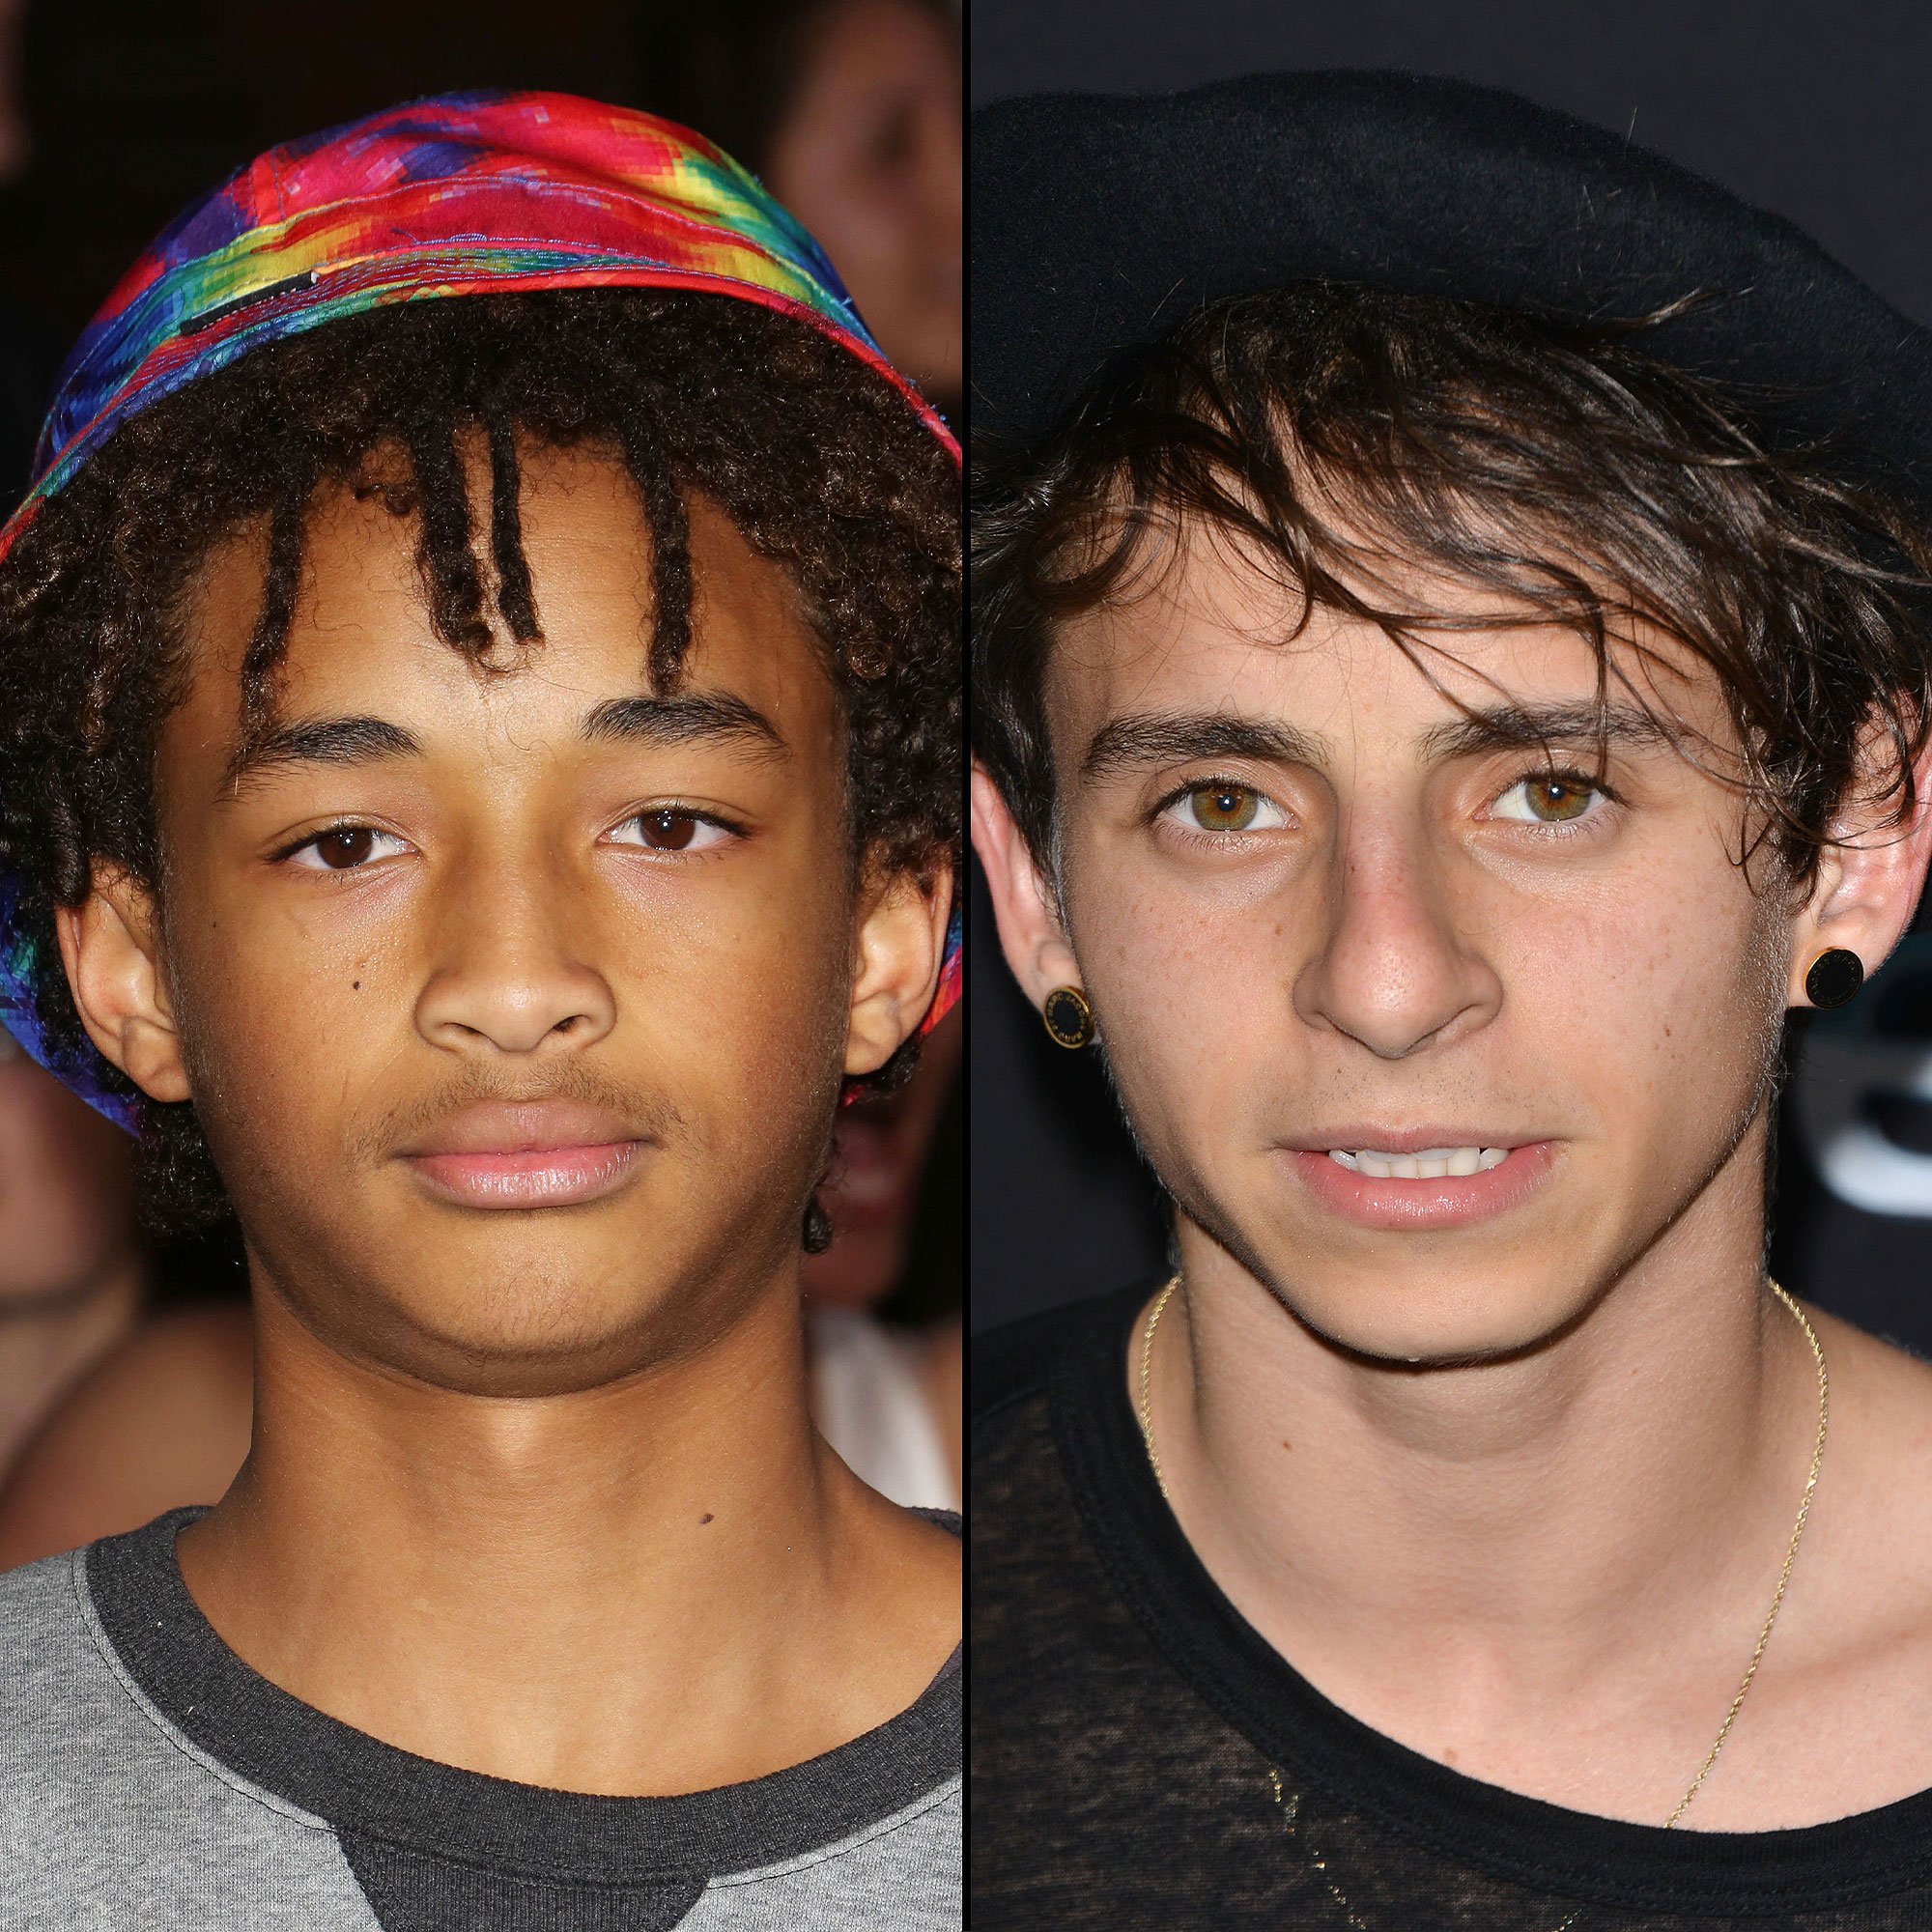 Jaden Smith, Moises Arias Go Out Together After Shirtless Bed Photos